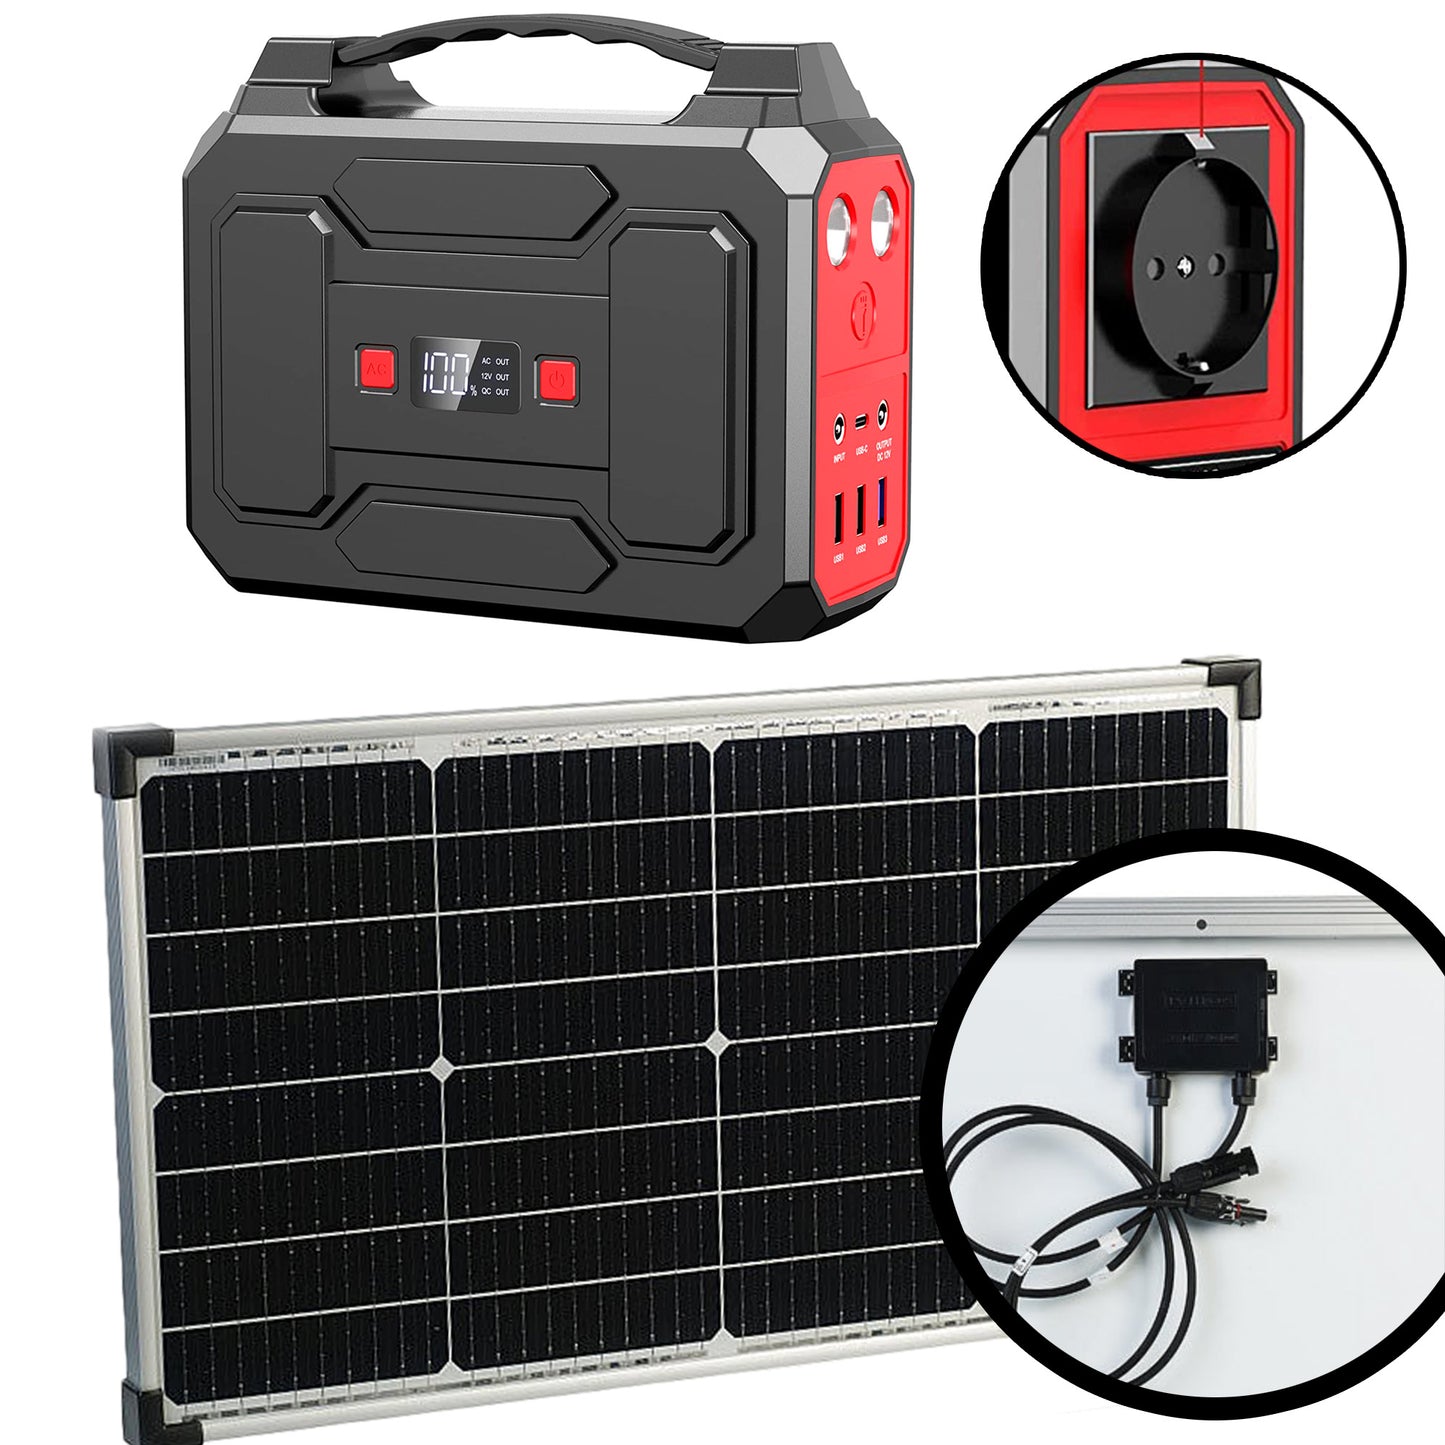 Solar panel with power bank for laptops & other devices Emergency power generator Solar power bank